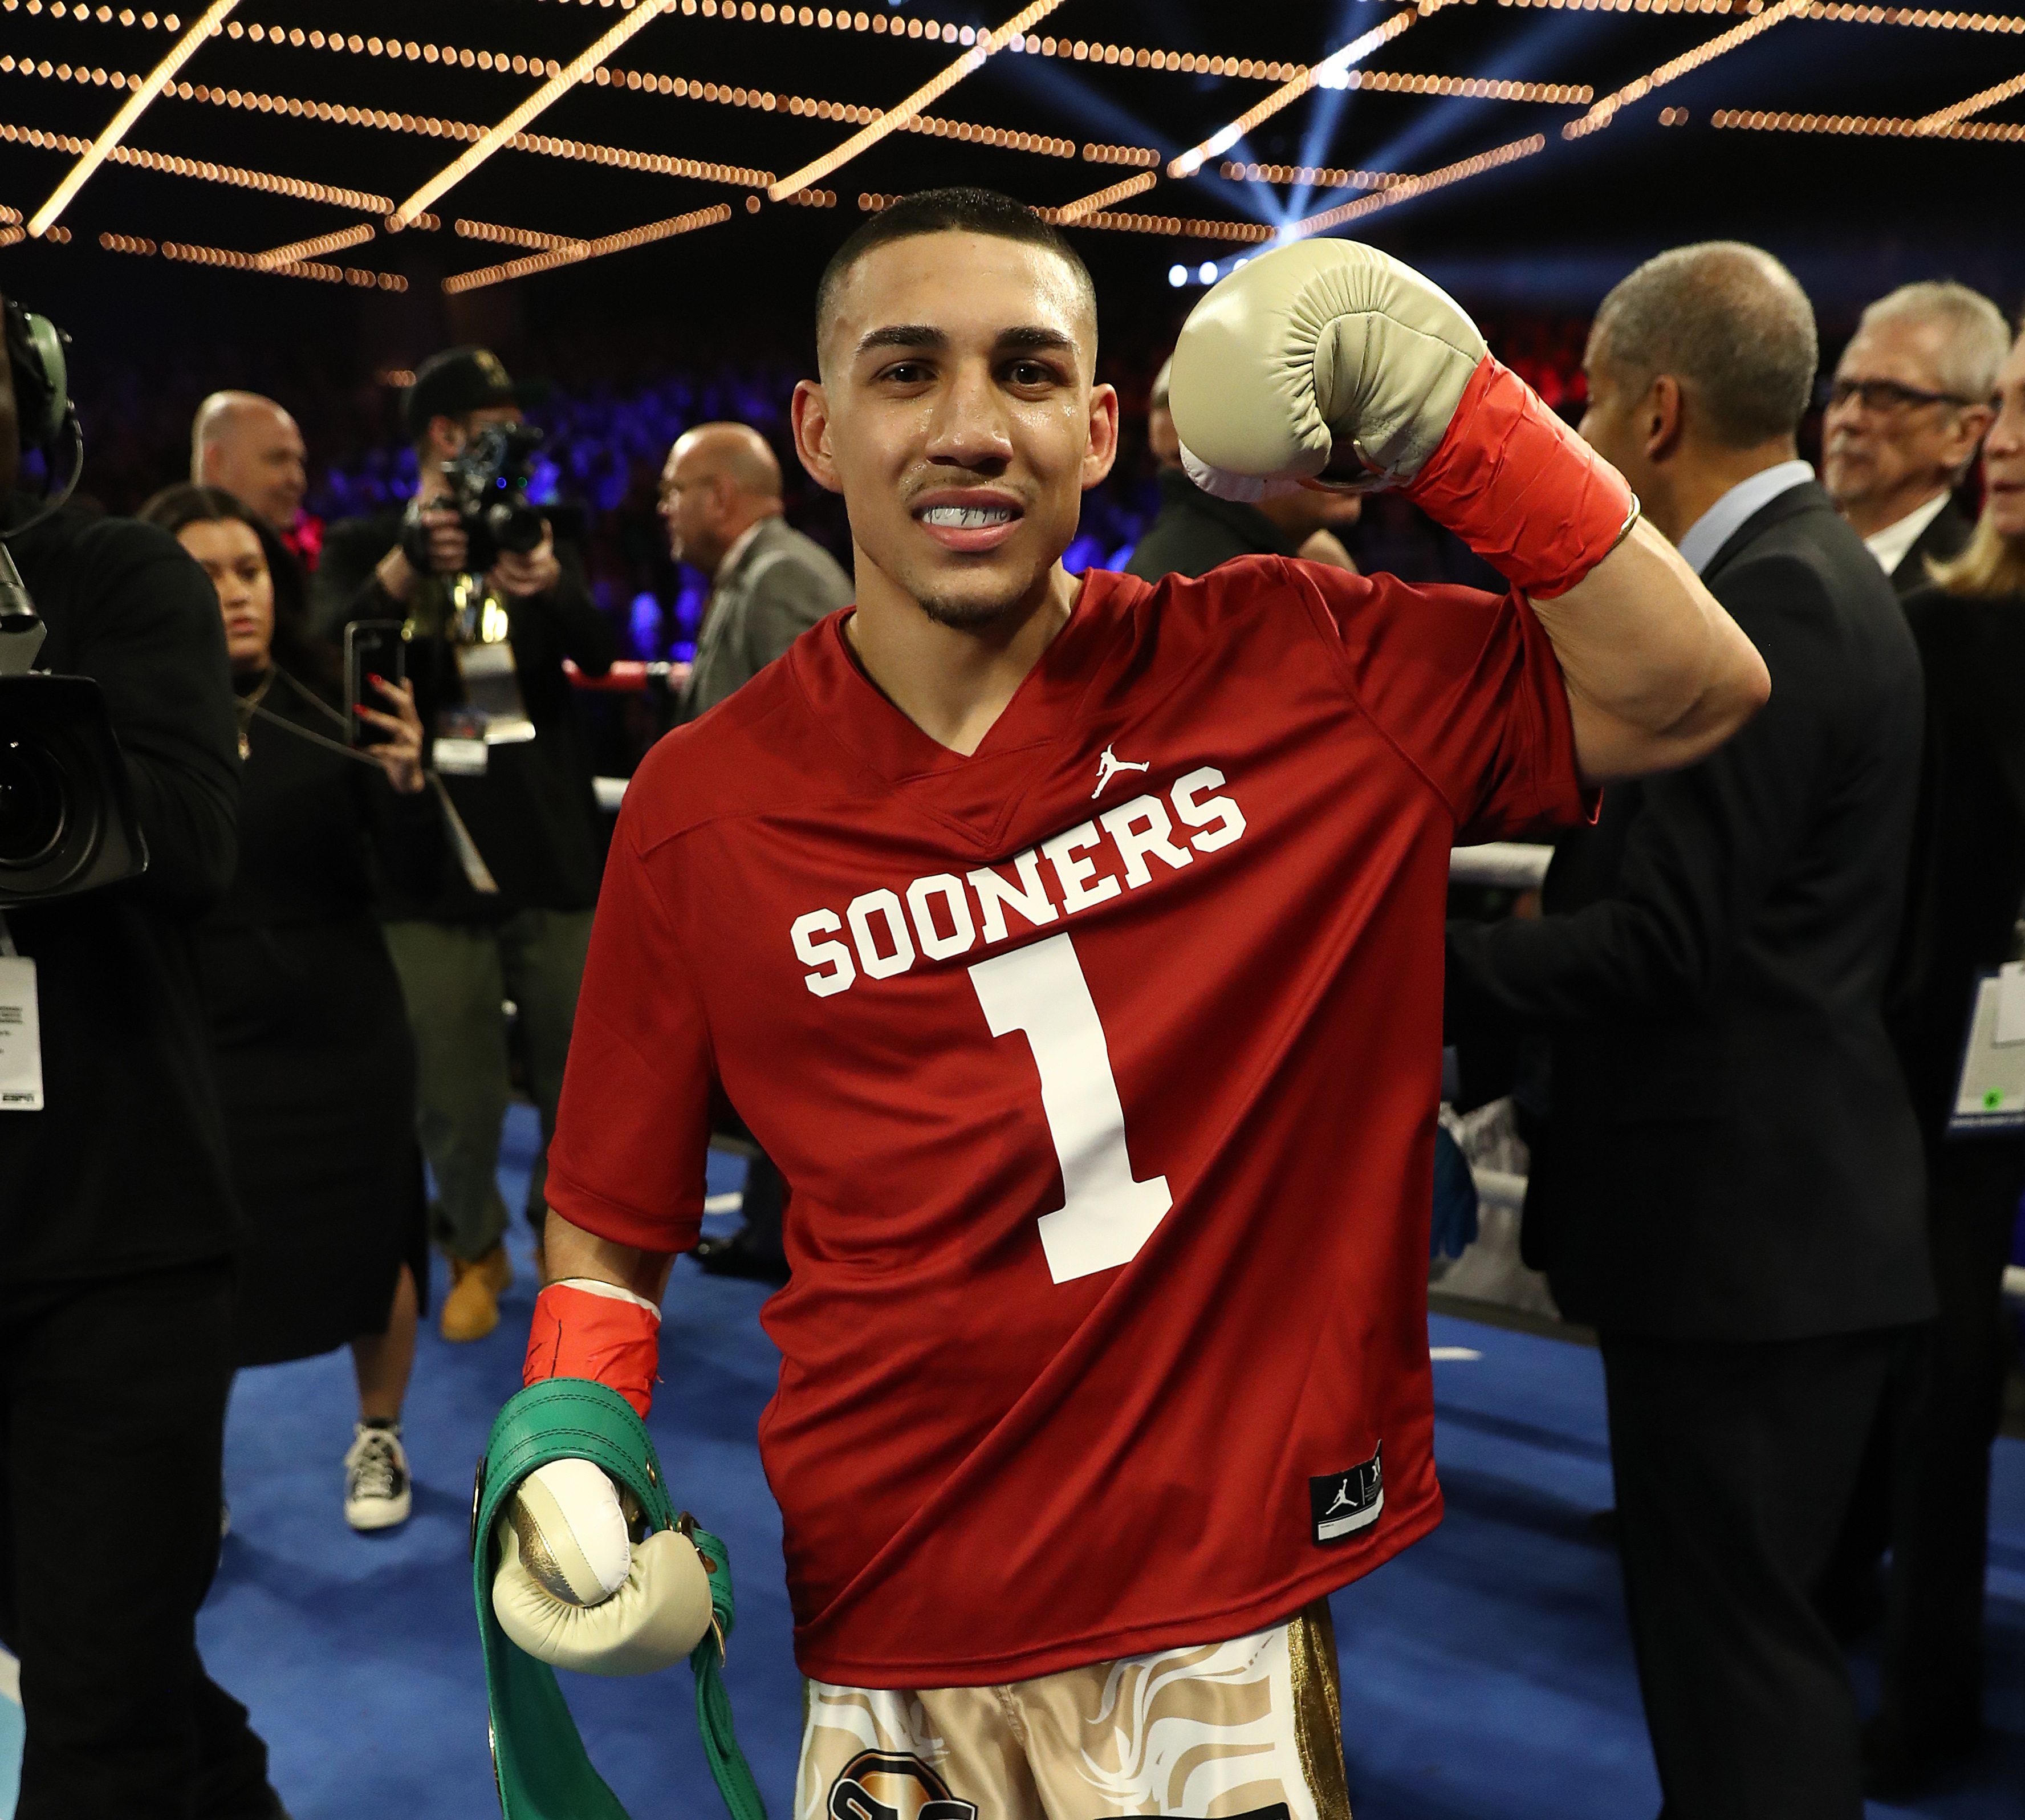 WATCH: Boxer Teofimo Lopez celebrates KO by putting on Kyler Murray jersey  minutes after Heisman win